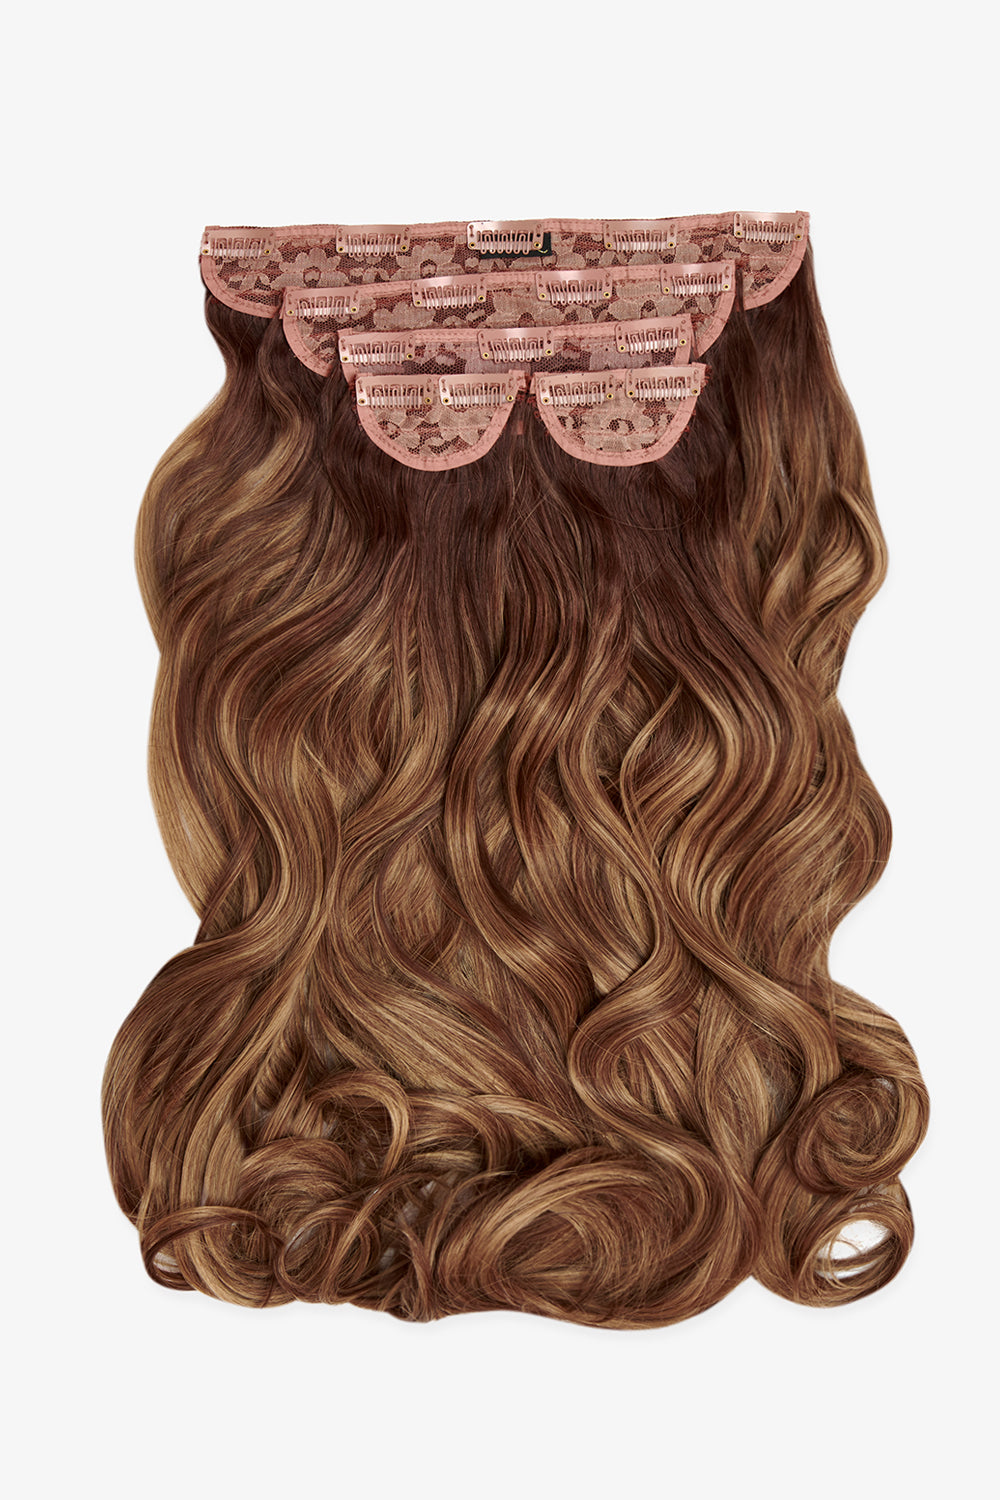 Super Thick 22" 5 Piece Curly Clip Hair Extensions + Hair Care Bundle - Rooted Mellow Brown